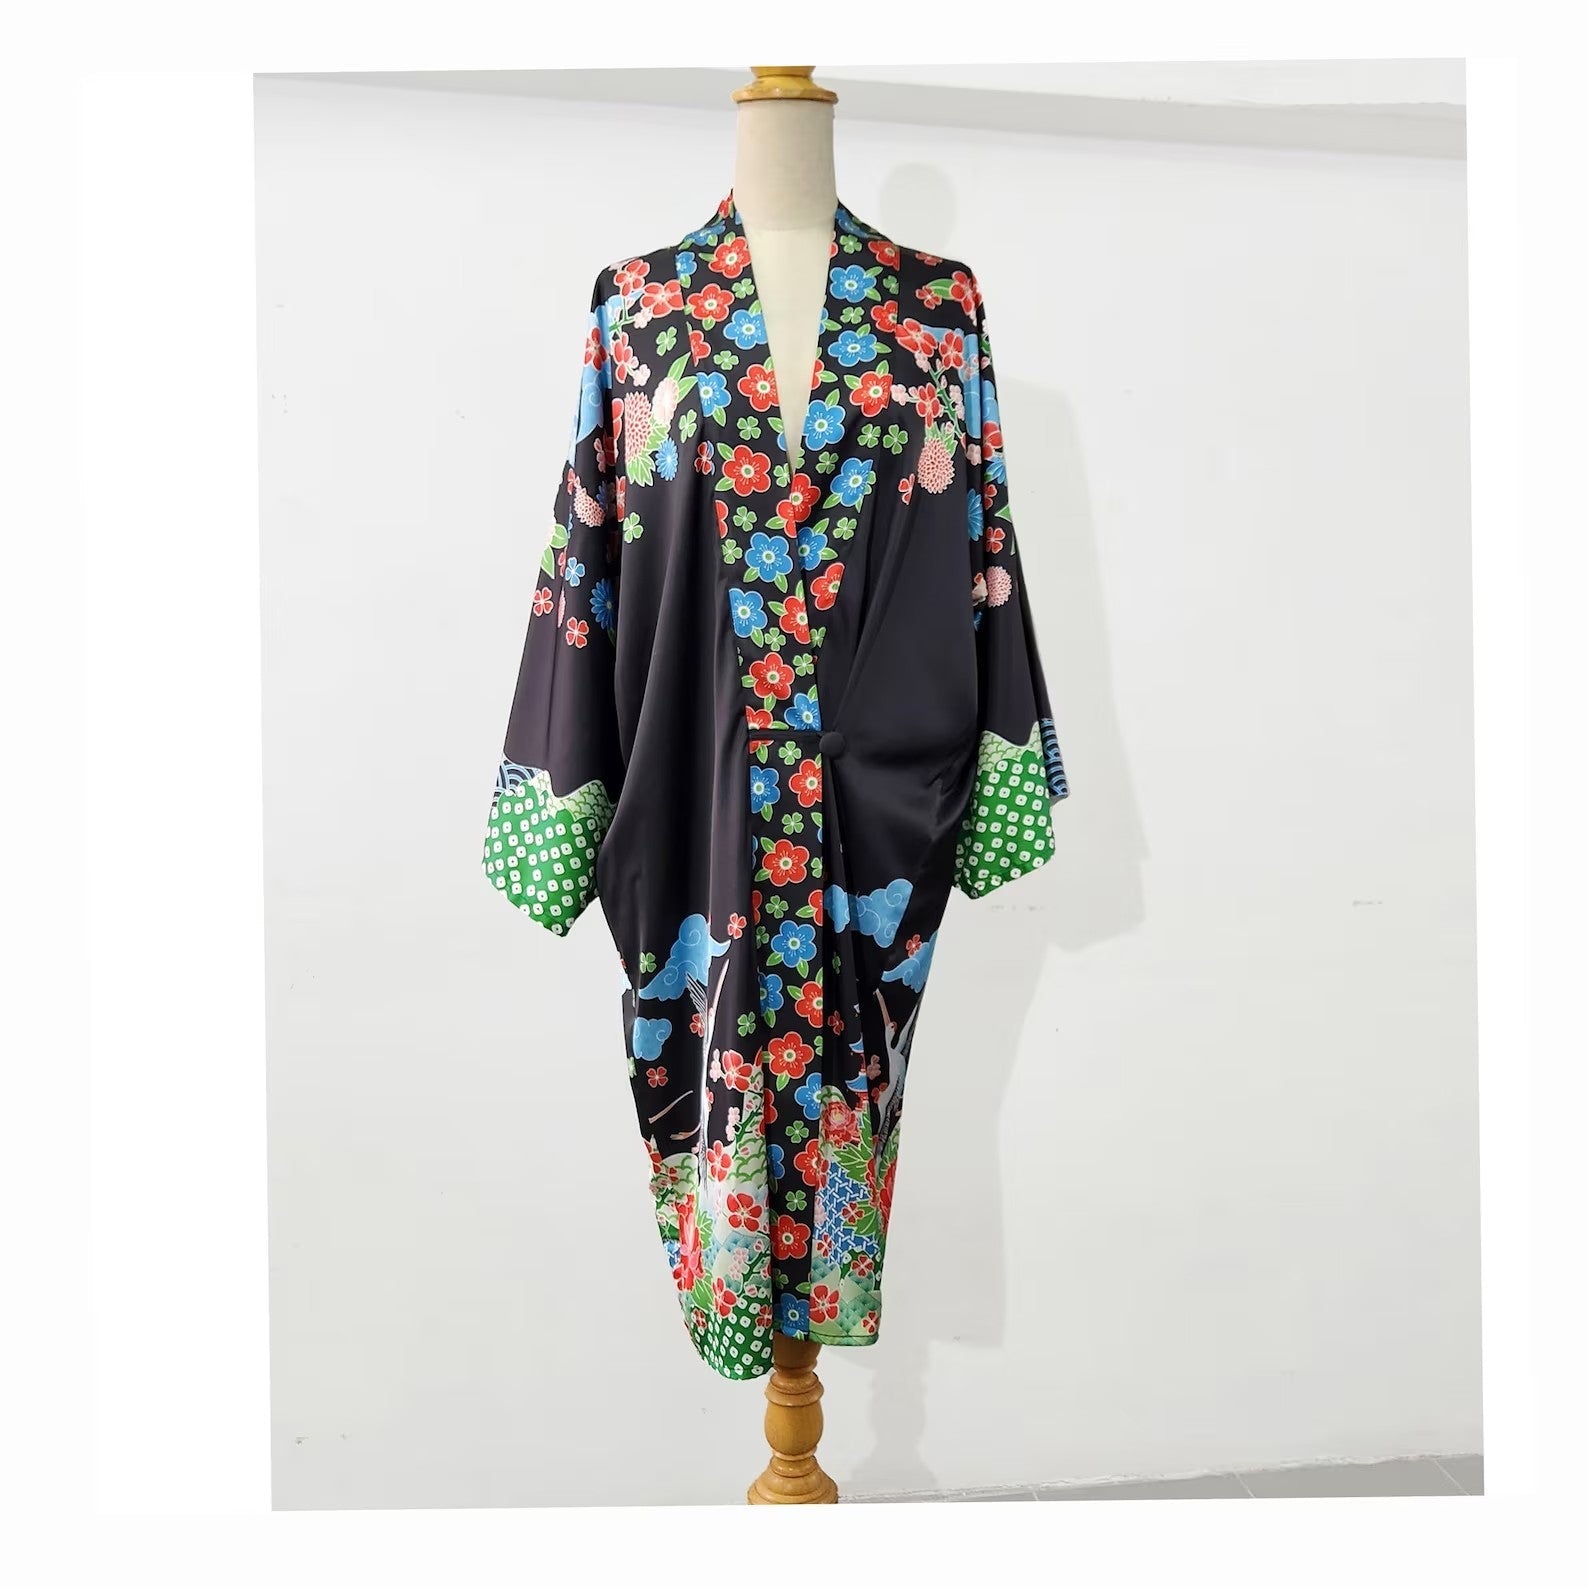 Japanese art inspired kimono robe in black with floral and bird print, a 1920s-inspired kimono robe